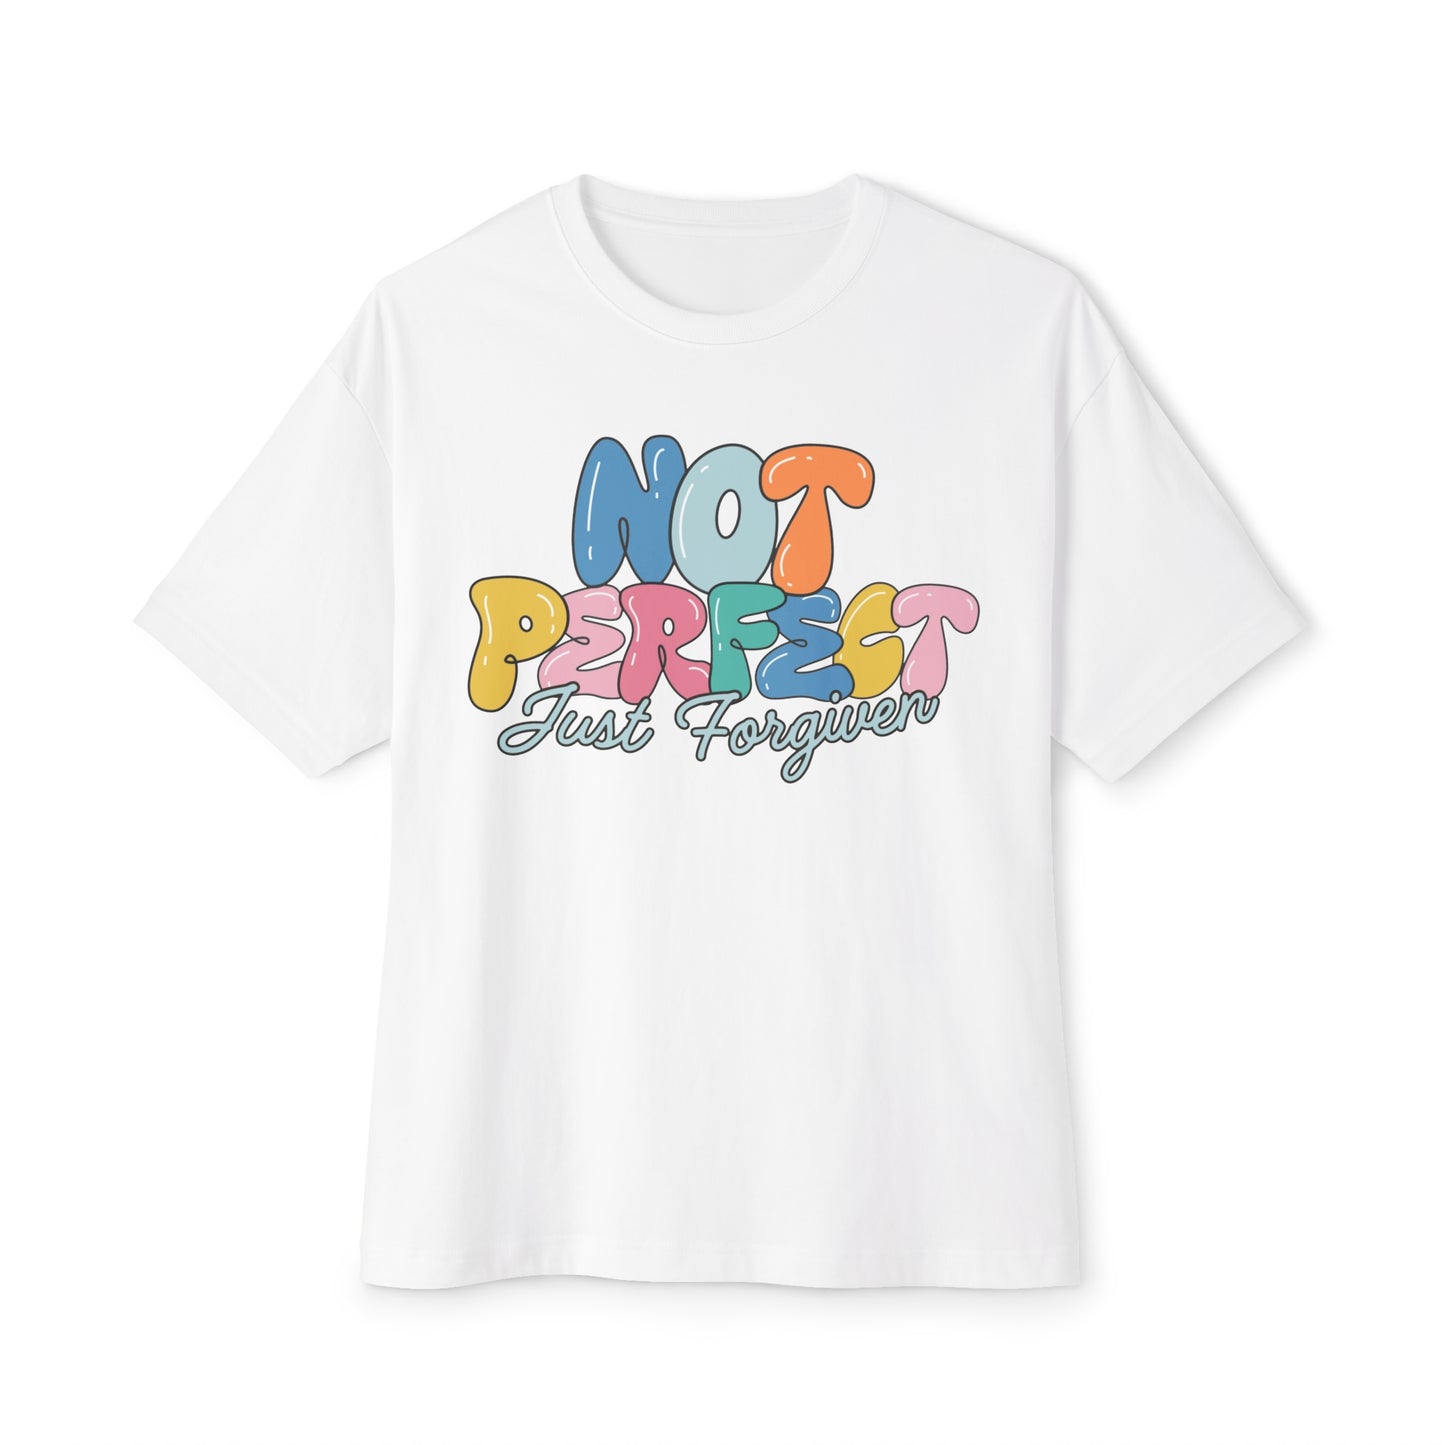 "Not Perfect" Adult Unisex Boxy Tee